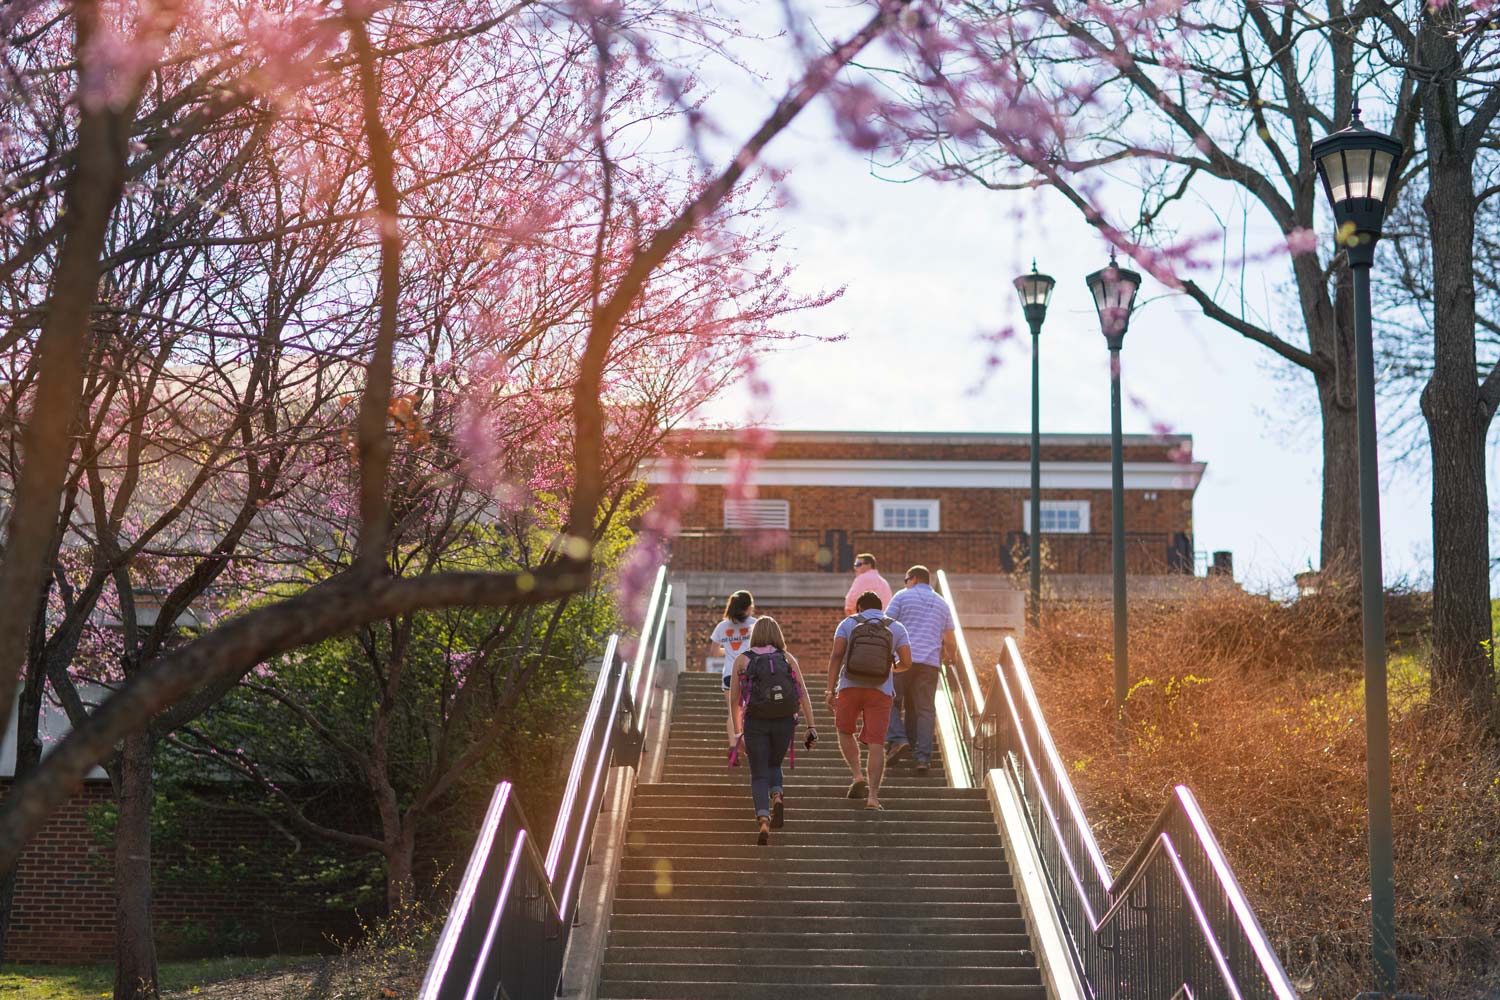 Five UVA students walk up a long flight of stairs next to blooming redbud trees